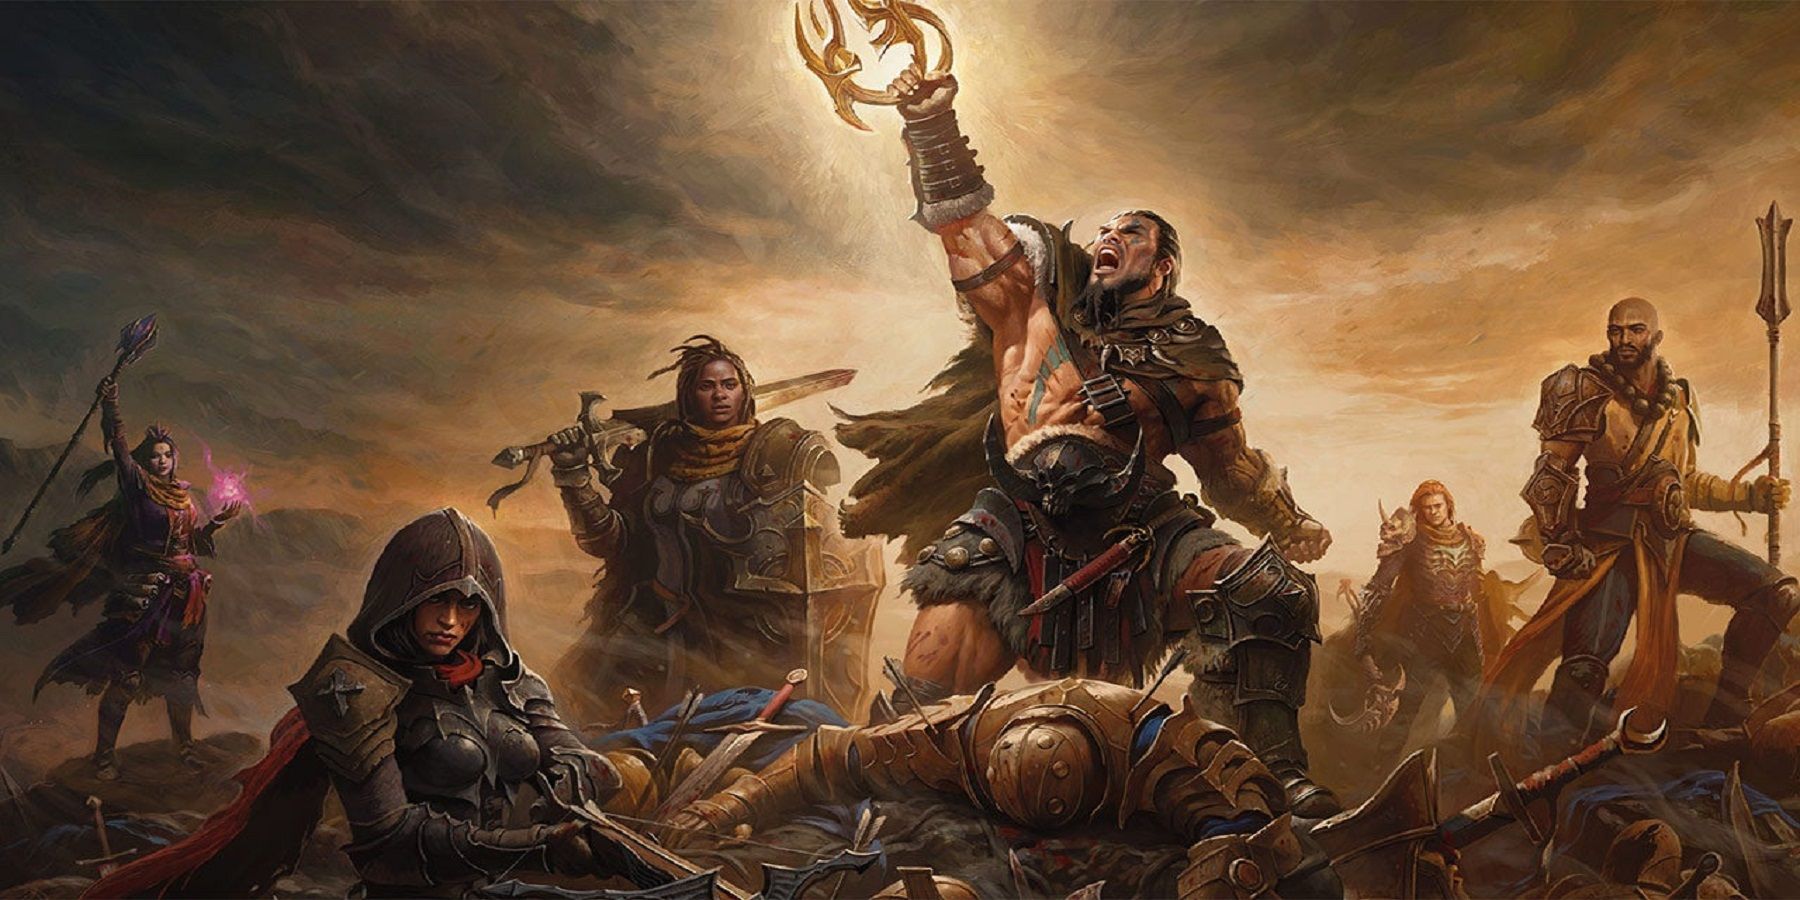 A Diablo Immortal is taking advantage of World of Warcraft's auction house to avoid microtransactions.